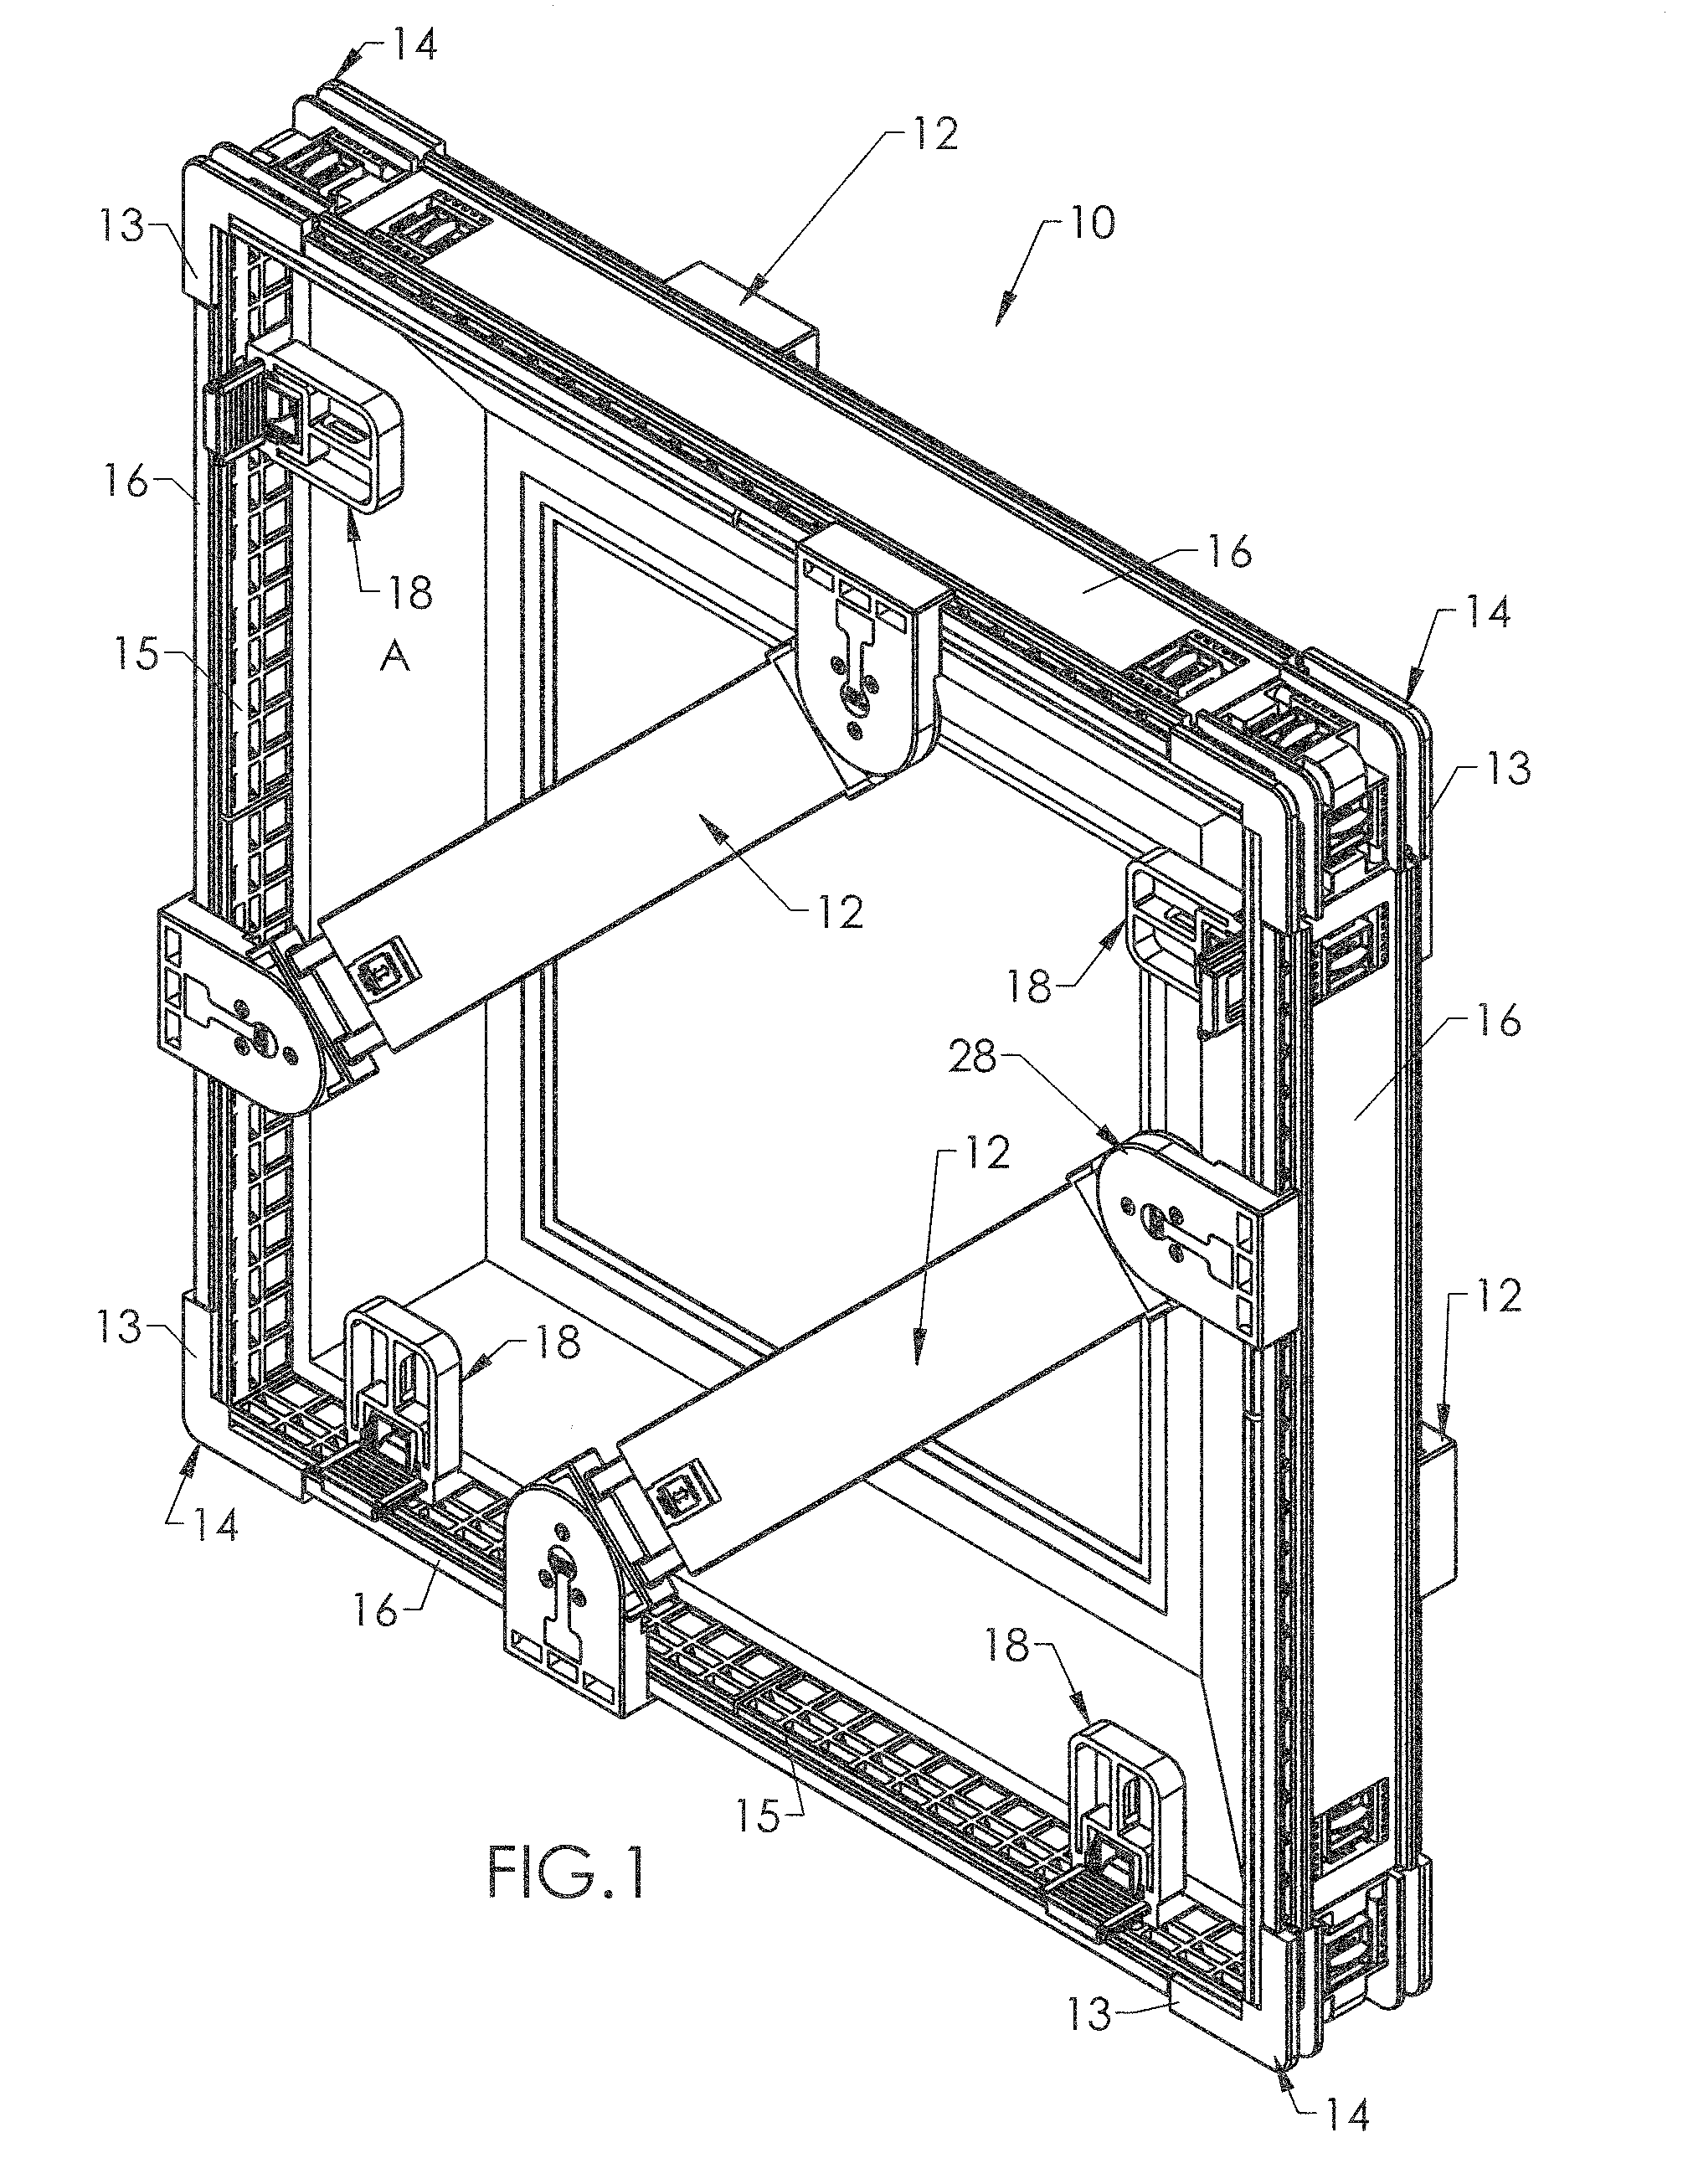 Adjustable, reusable packing crate